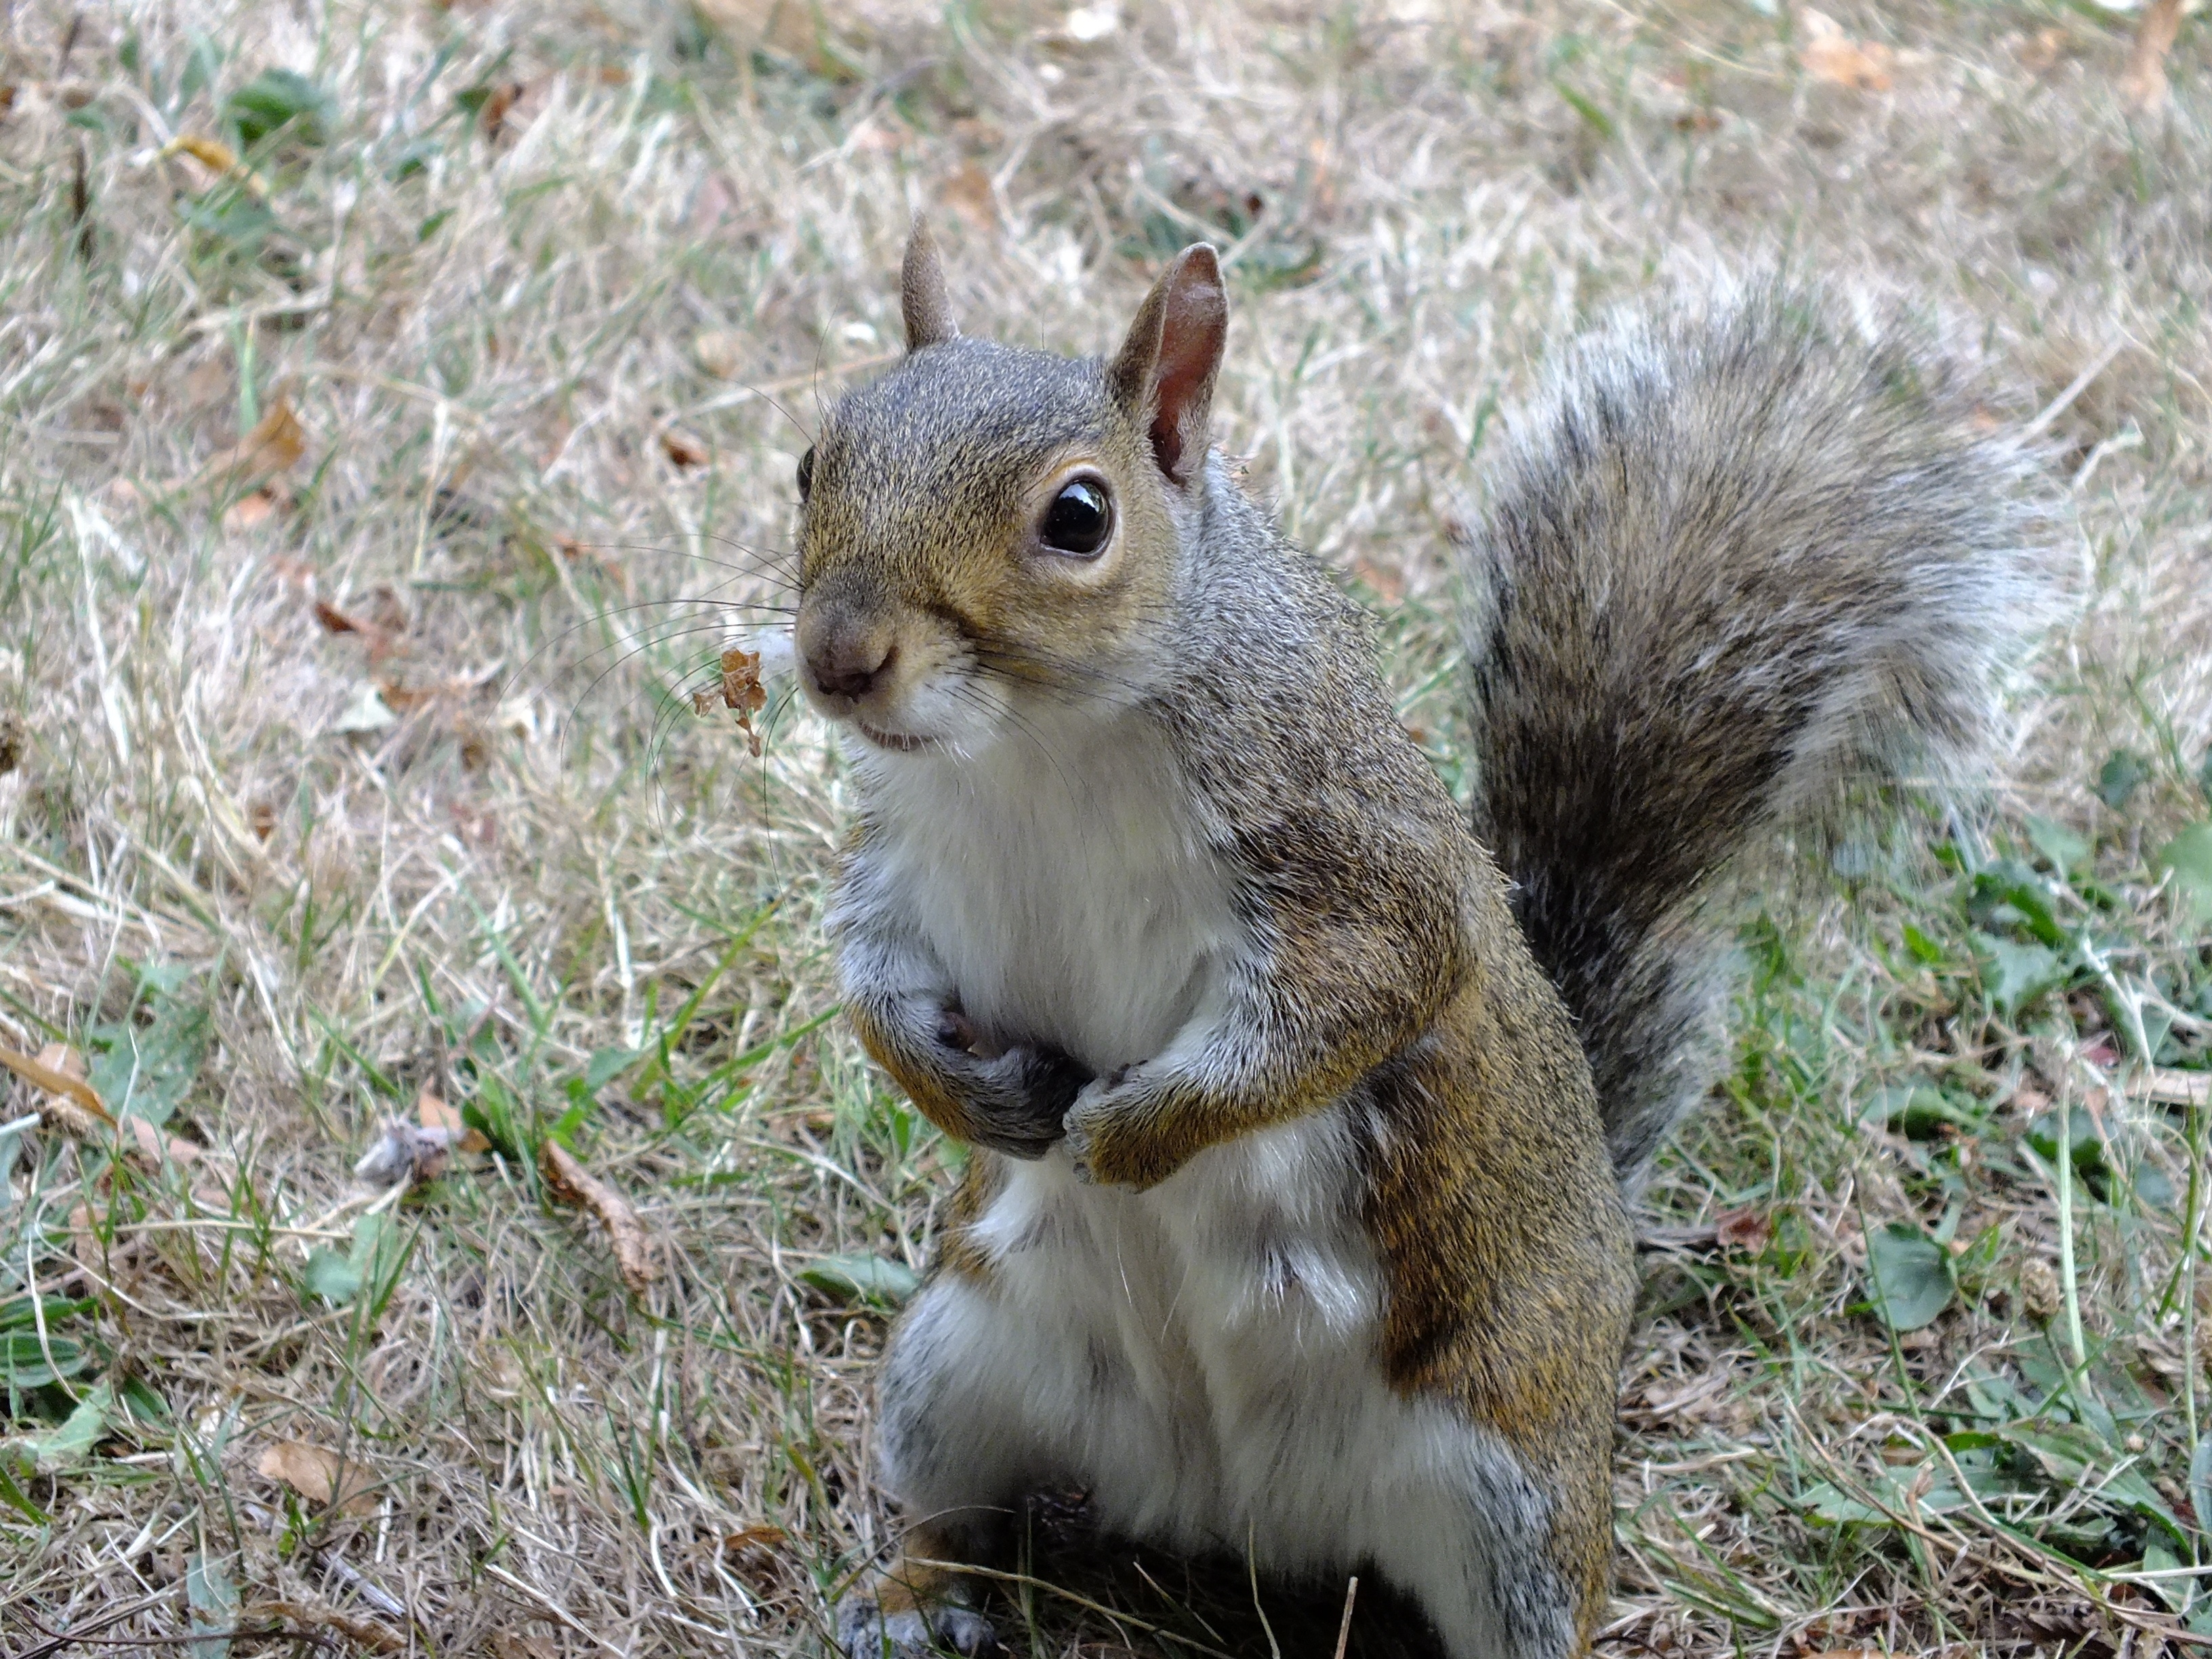 The squirrel stands looking at the camera